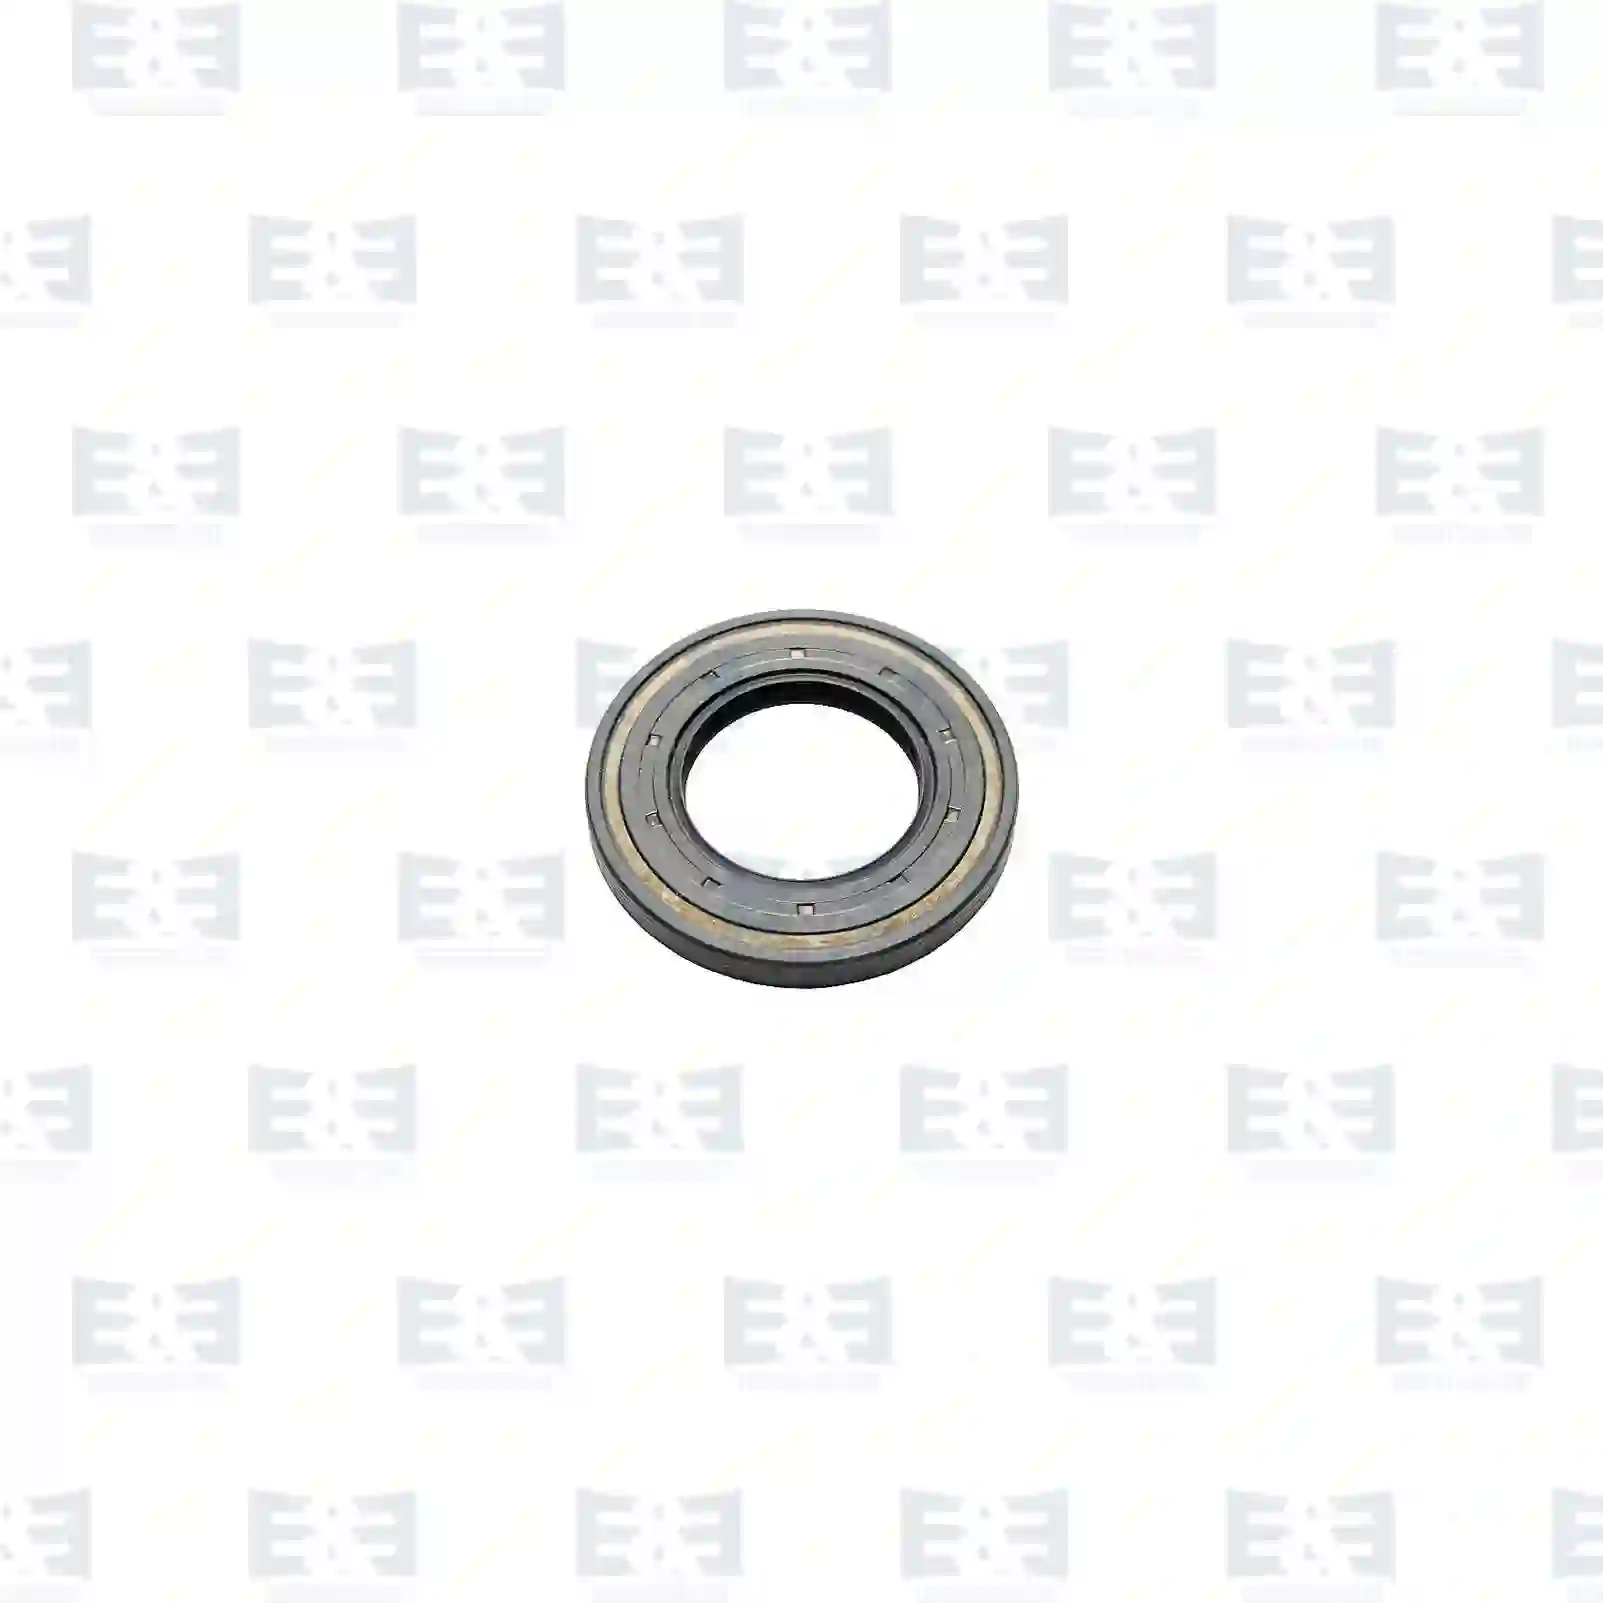 Camshaft Oil seal, EE No 2E2209984 ,  oem no:236202, 462035, 01125252, 01161983, 00538431, 40000110, 82022030, 0996480055, 44902474, 01125252, 01161983, 00538431, 236202, 462035, 1109870, 228109, 310951 E&E Truck Spare Parts | Truck Spare Parts, Auotomotive Spare Parts